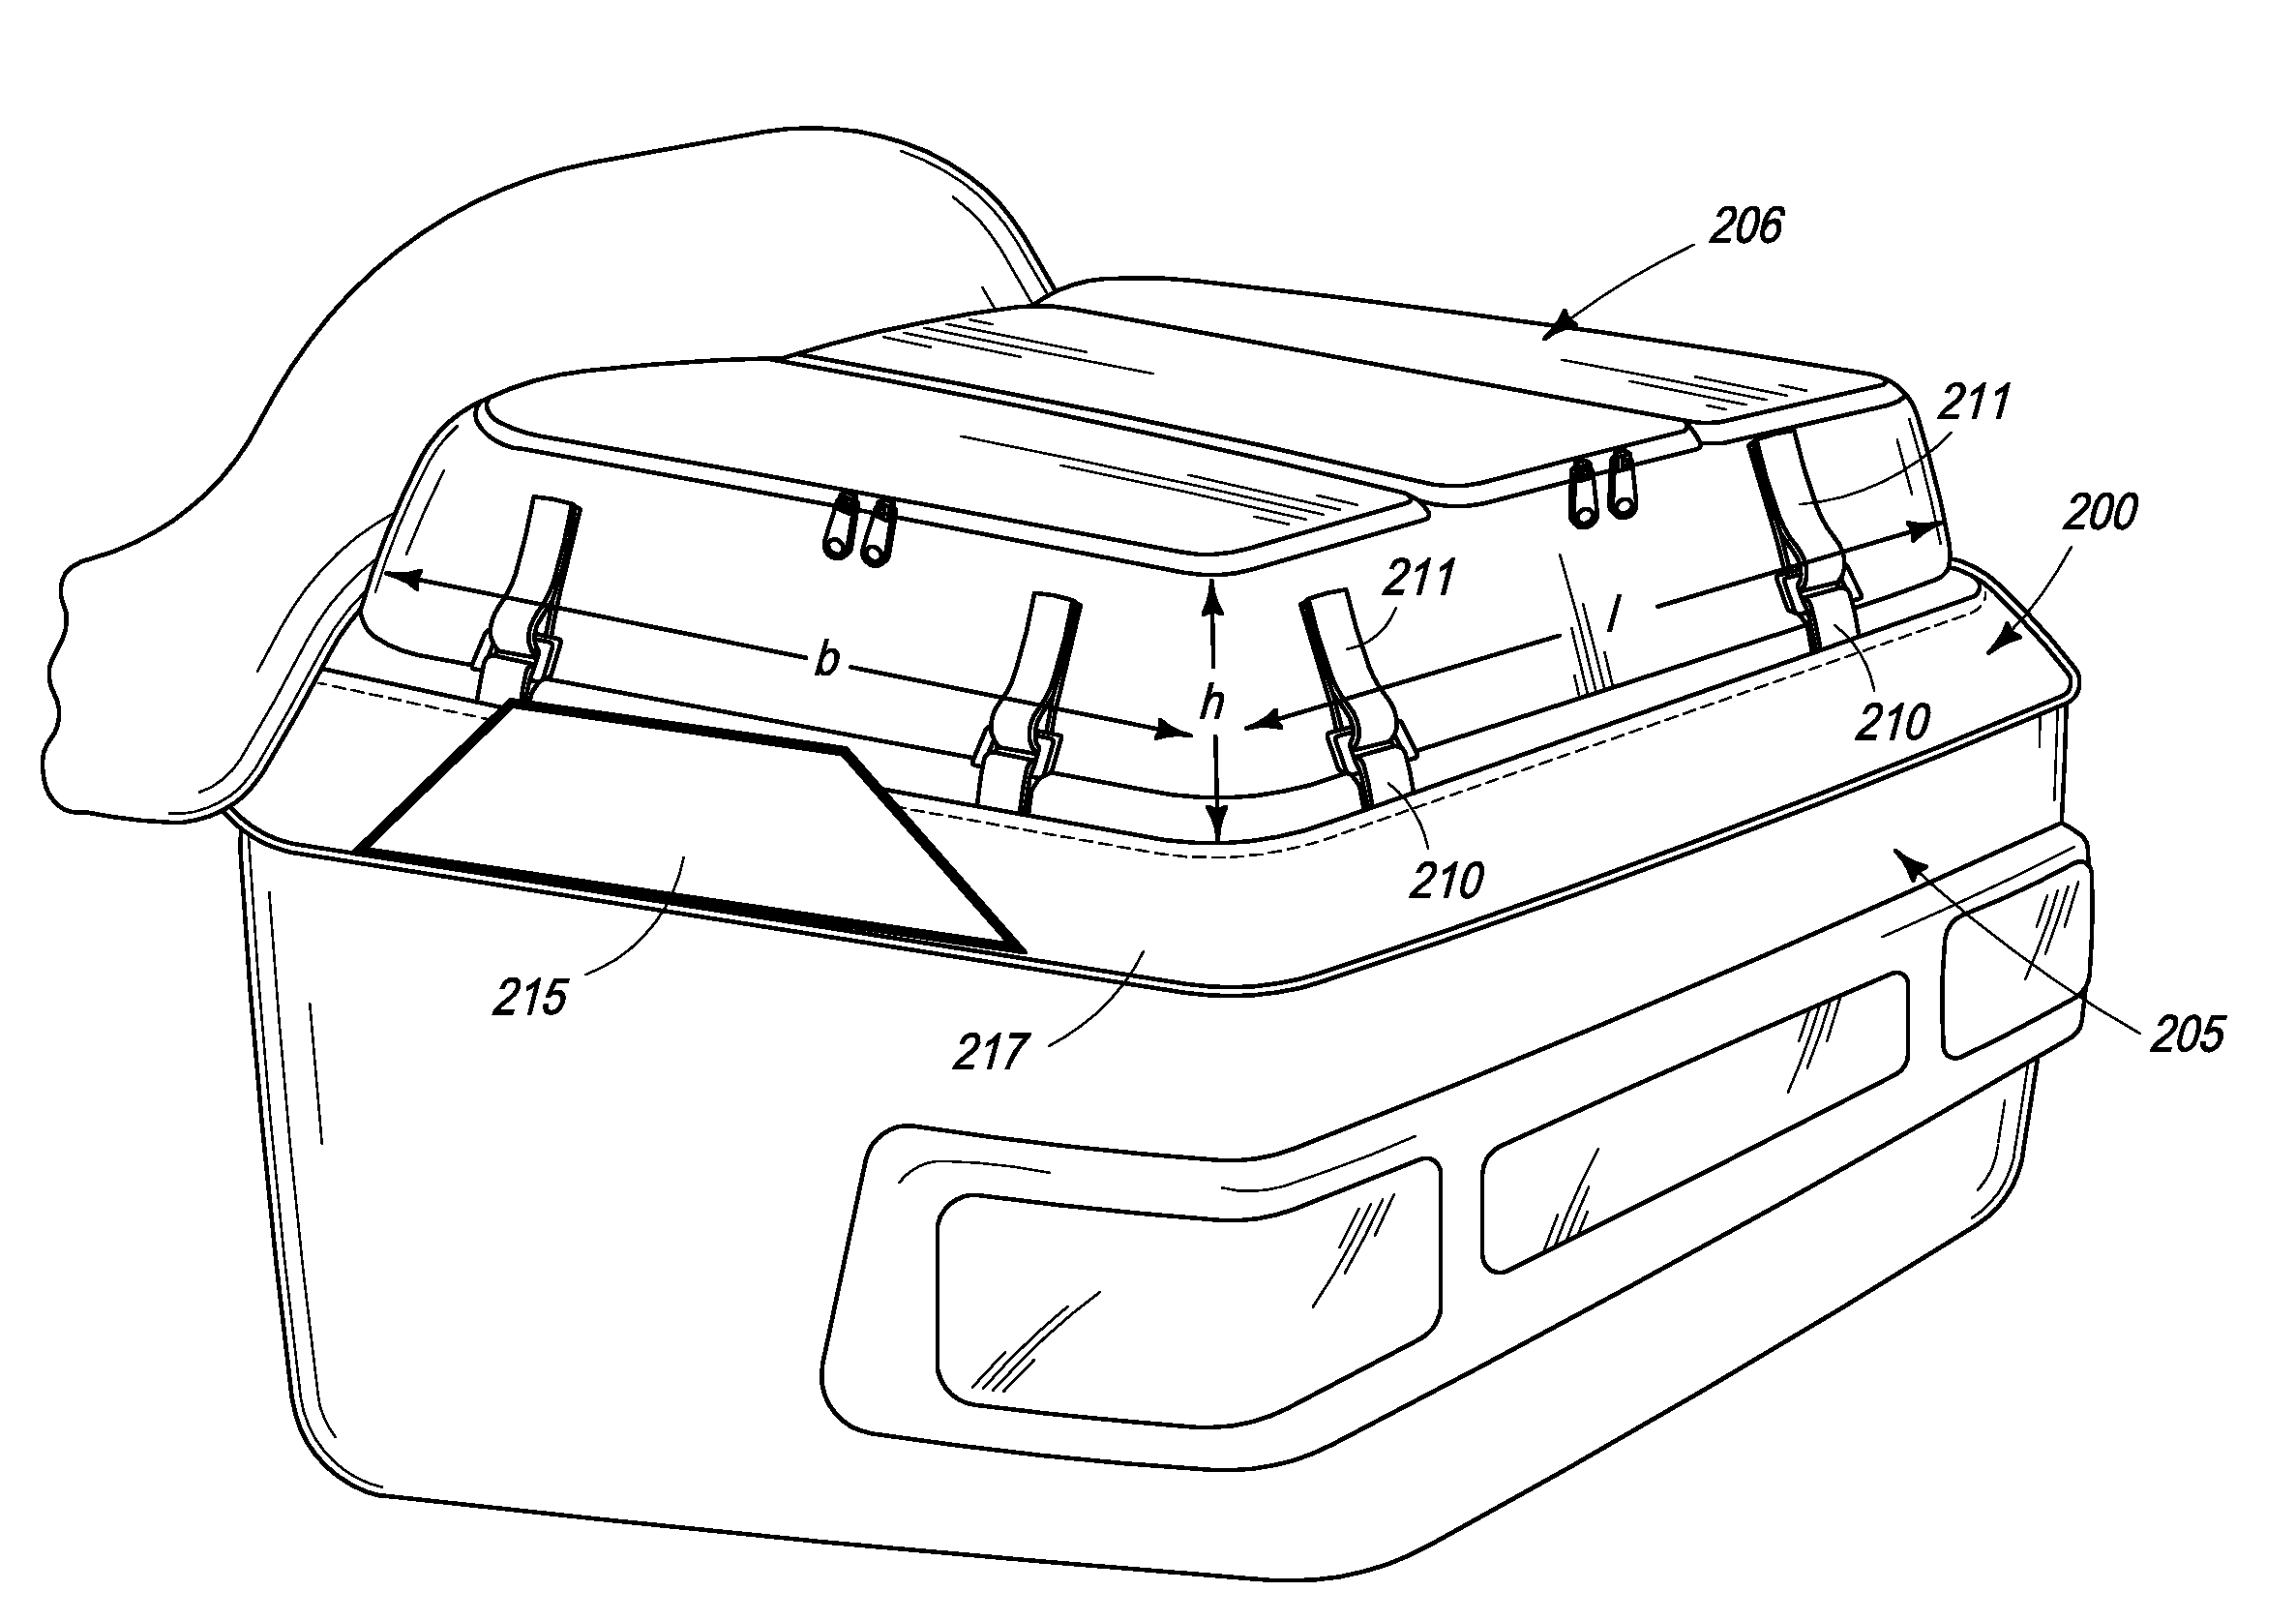 System and Method for Attaching Containers to a Trunk Surface